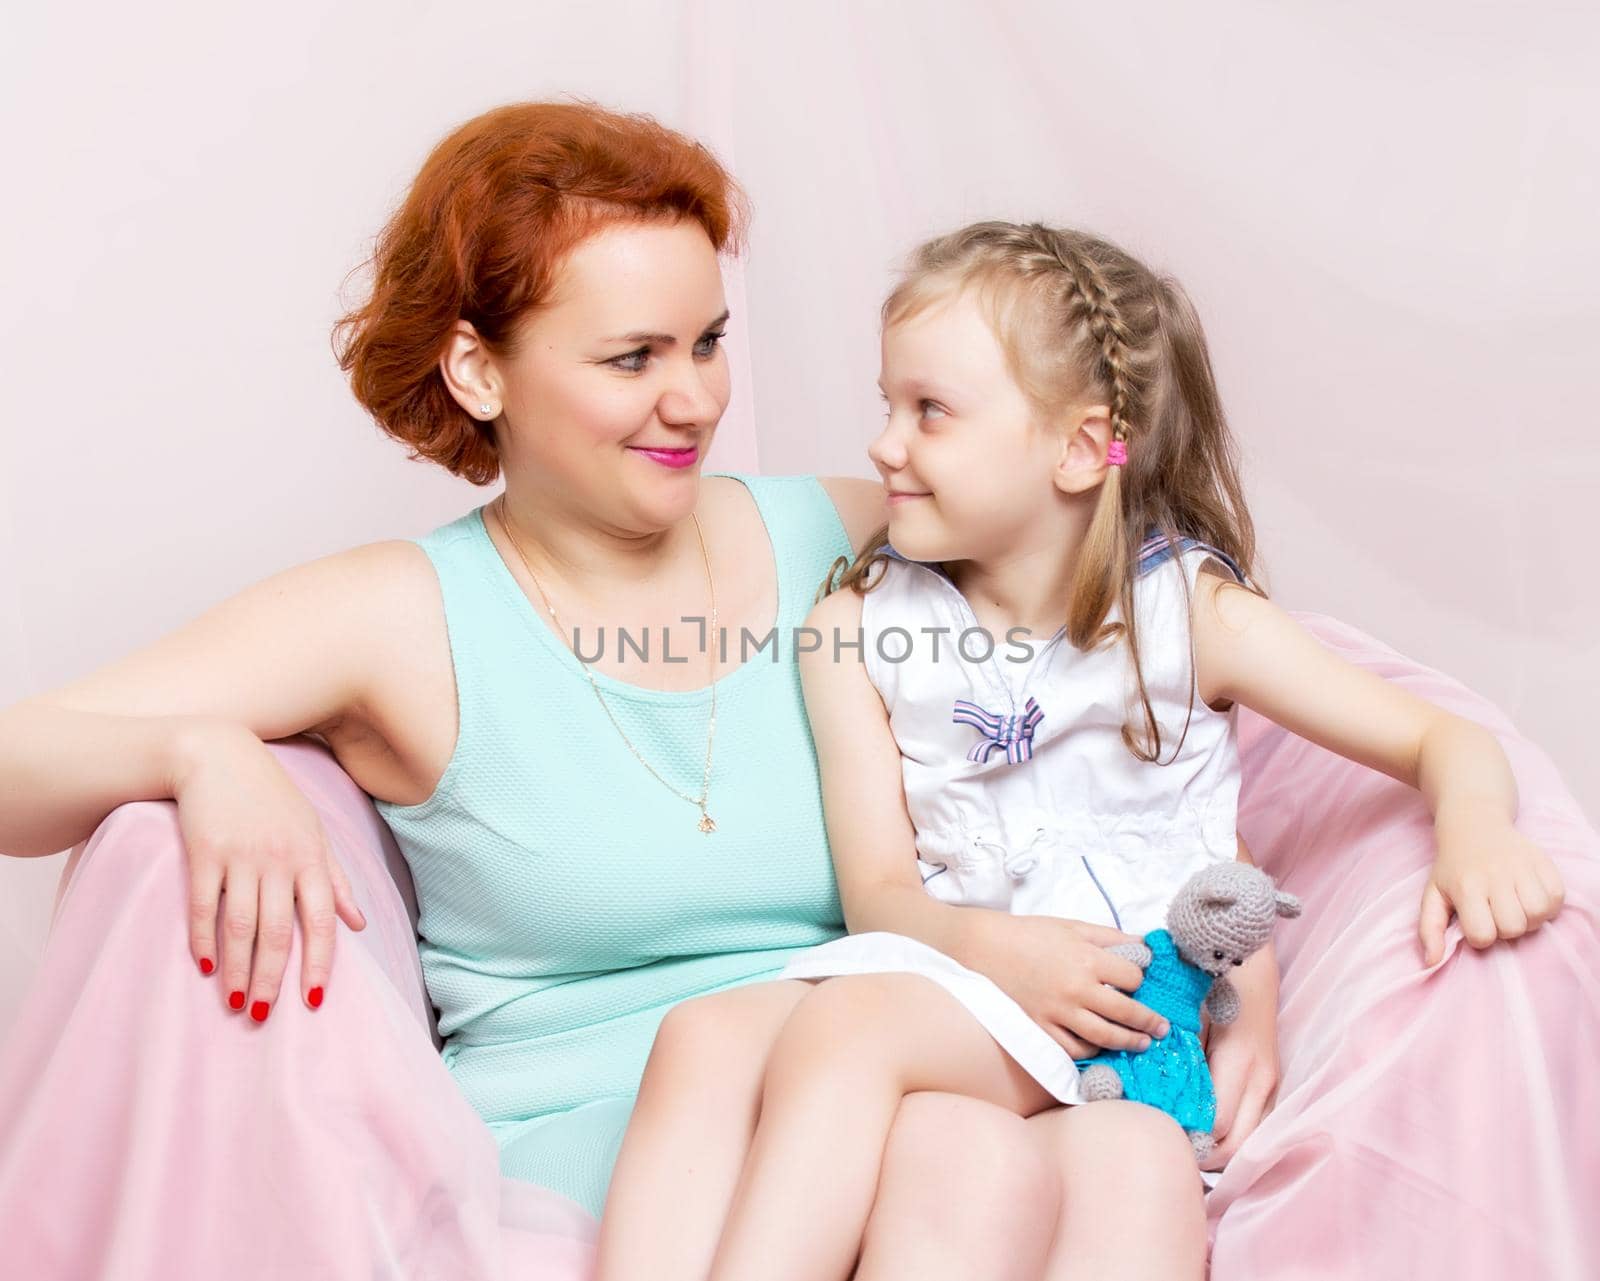 Mom and daughter are sitting on the couch. The concept of family happiness, parenthood, childhood. Isolated on white background.